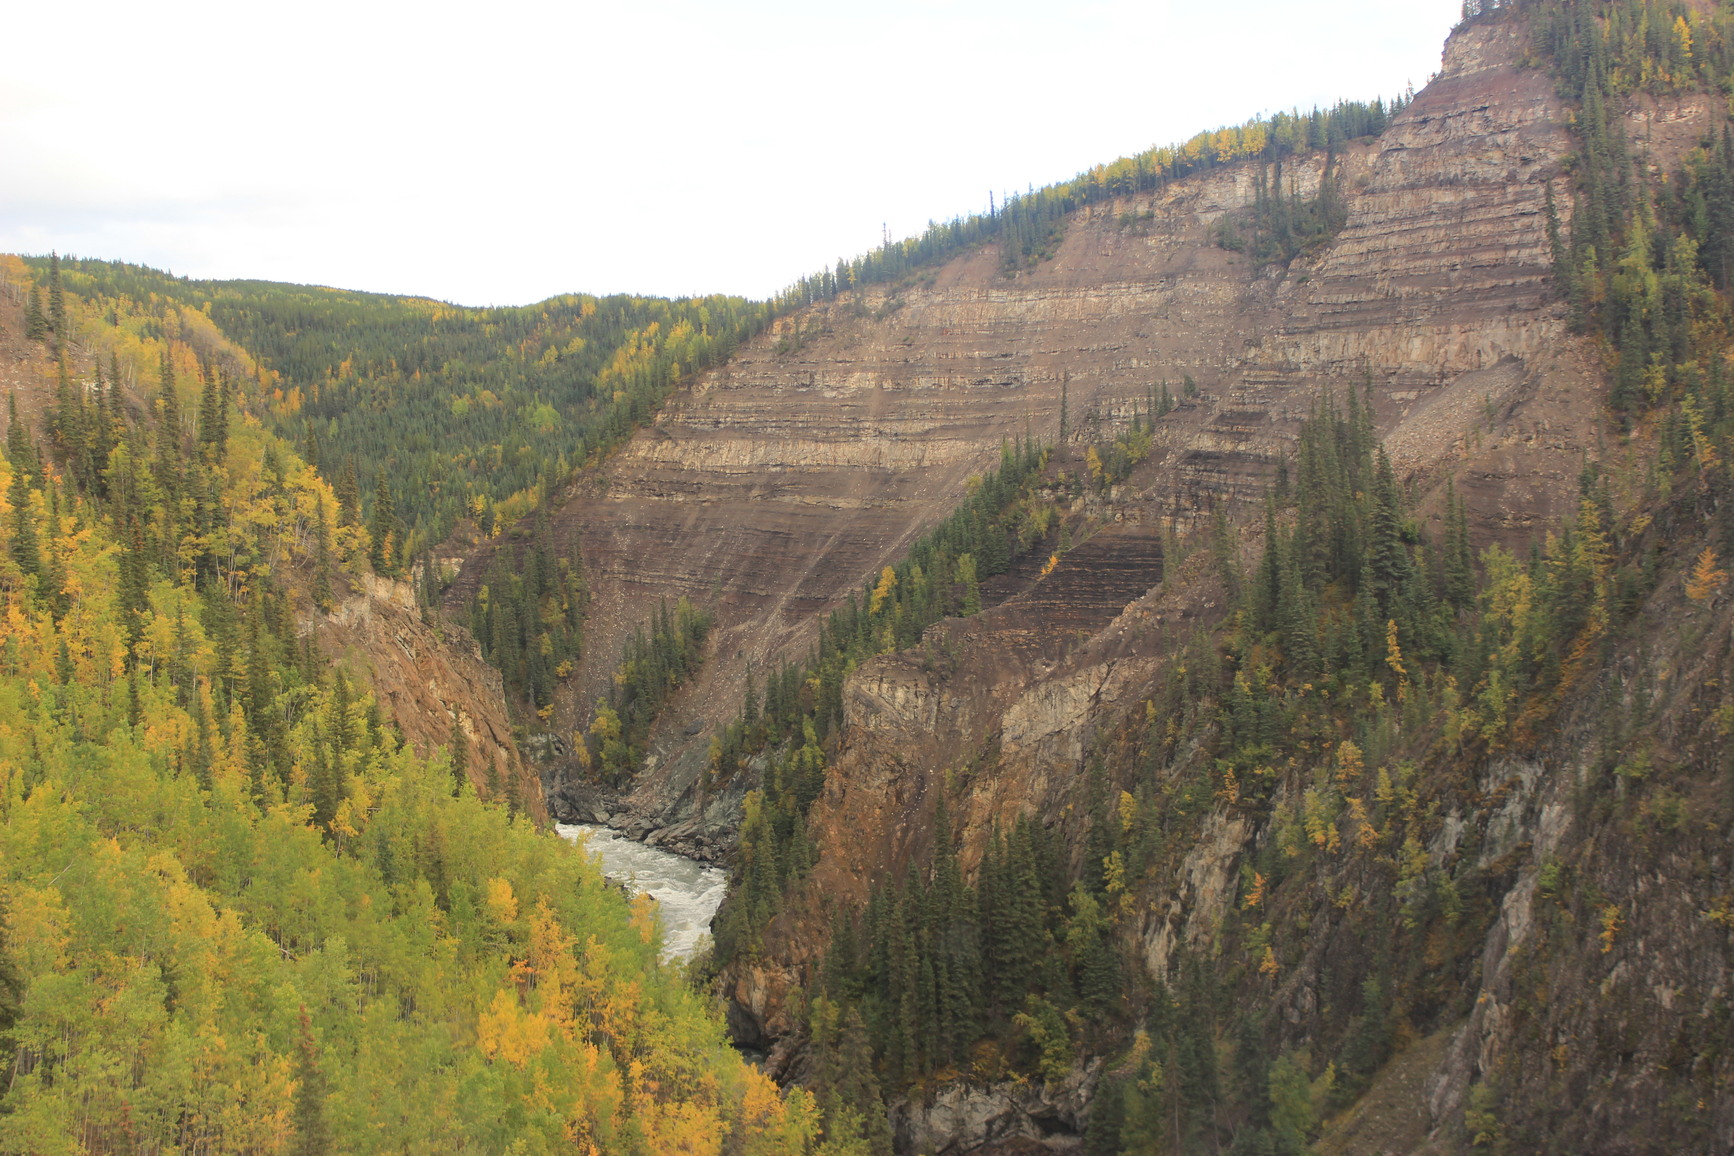 Overlooking the steep-walled canyon, composed of sedimentary and volcanic rock